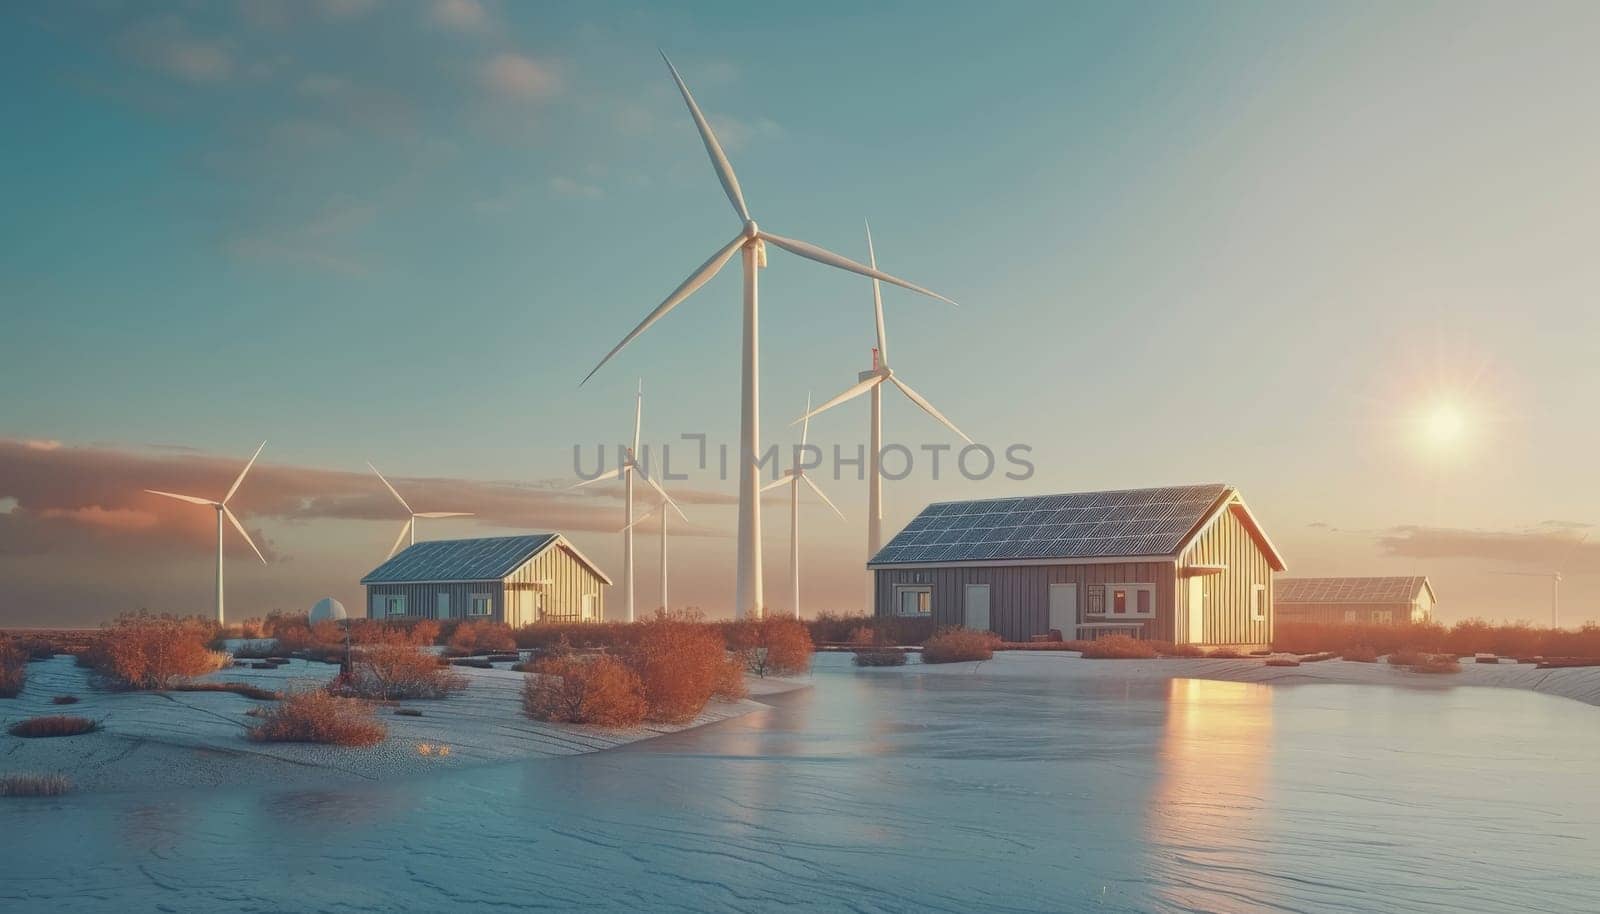 A wind farm with a red C on a white building by AI generated image.